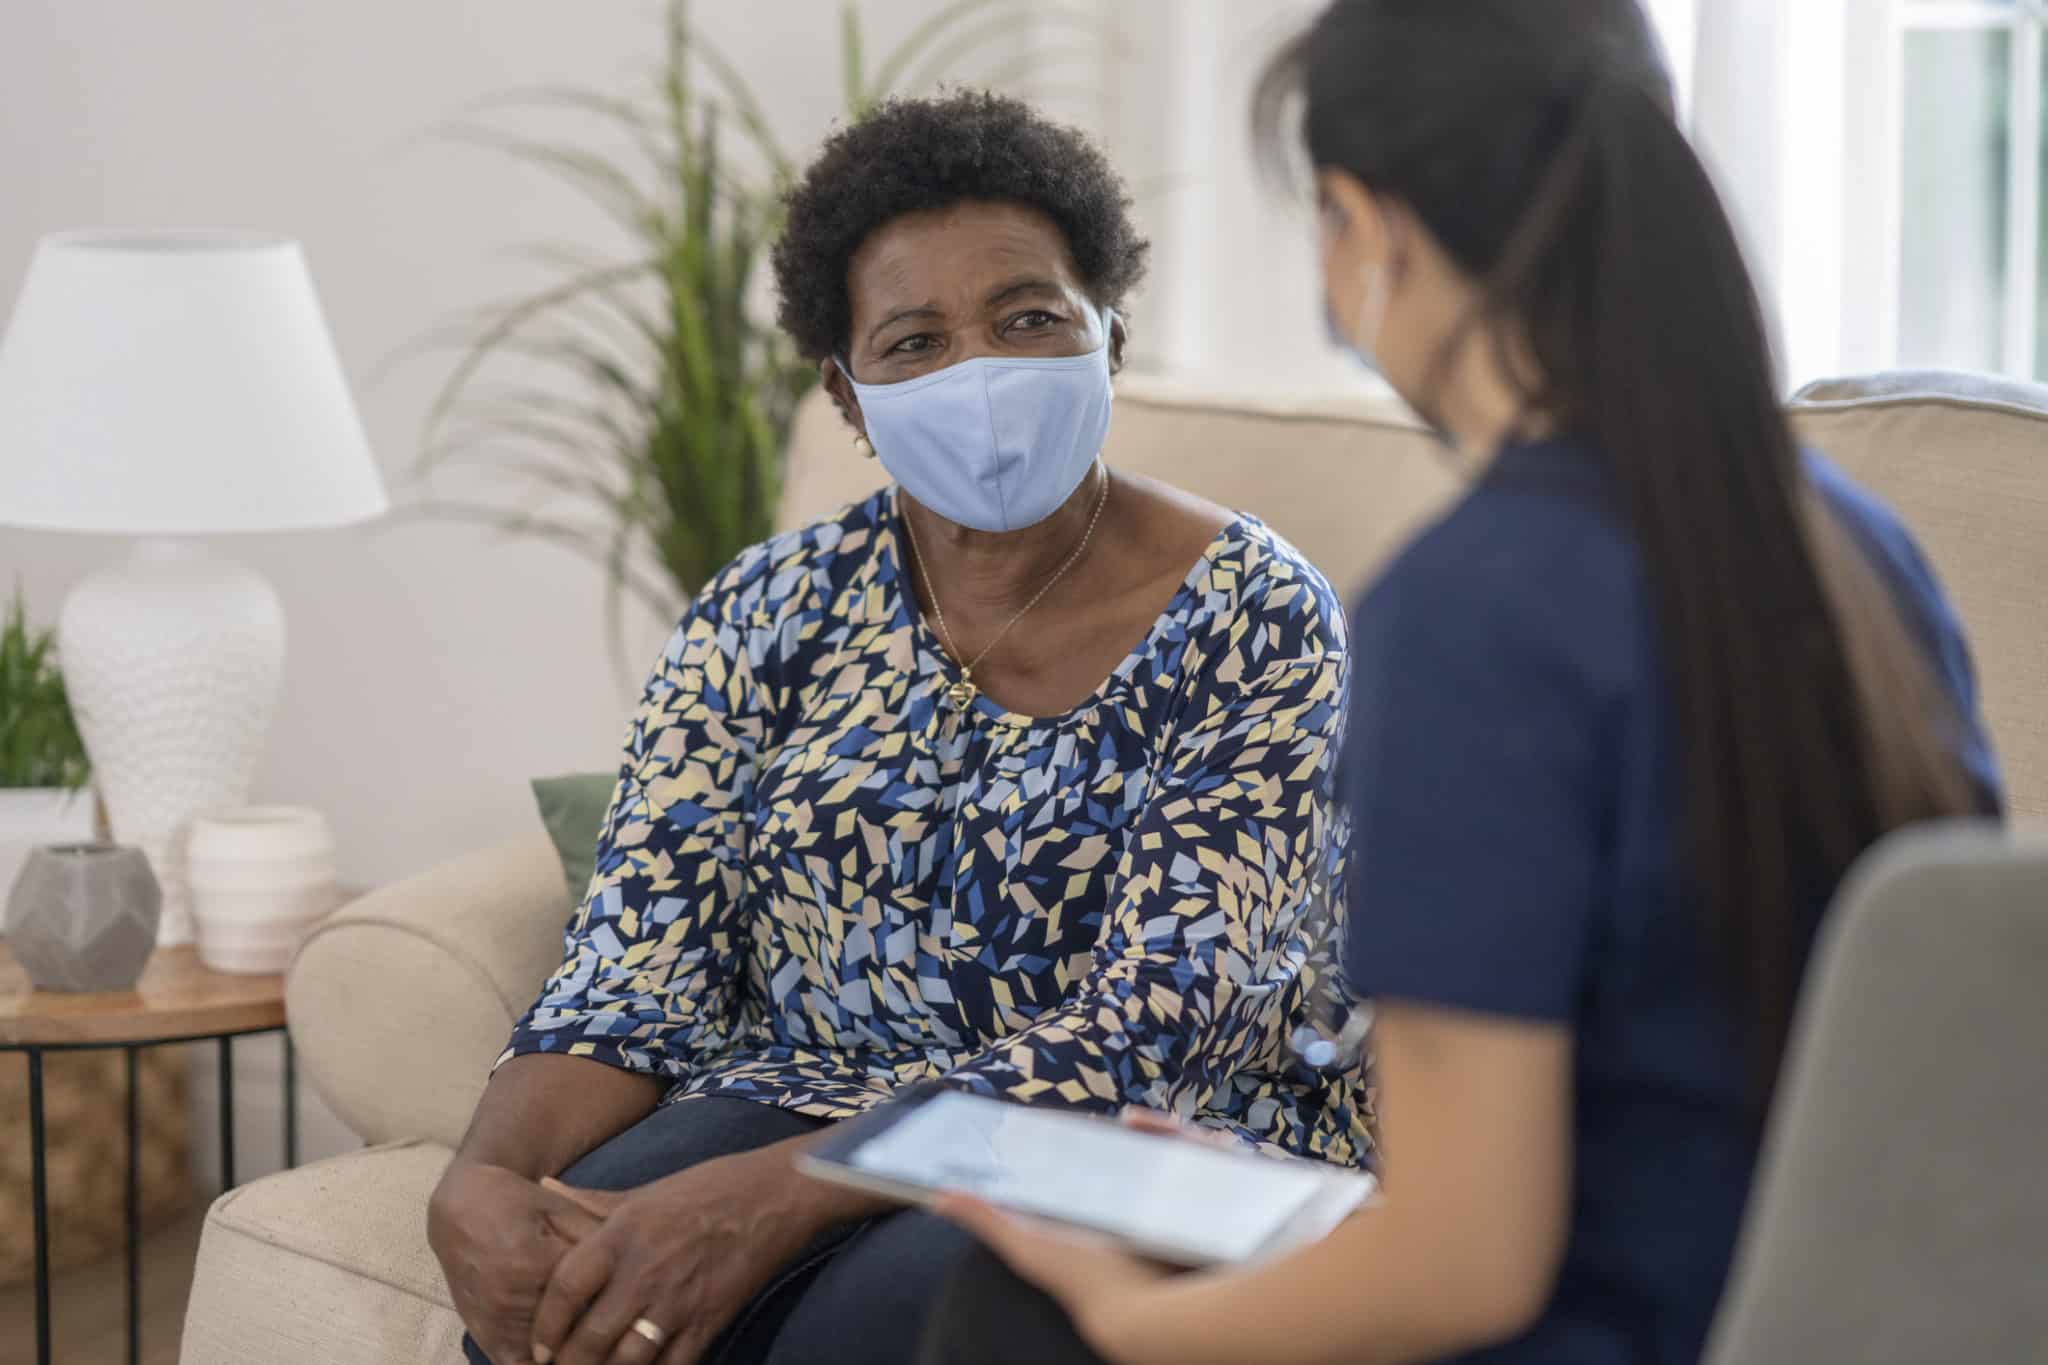 Home caregiver visiting with patient wearing masks